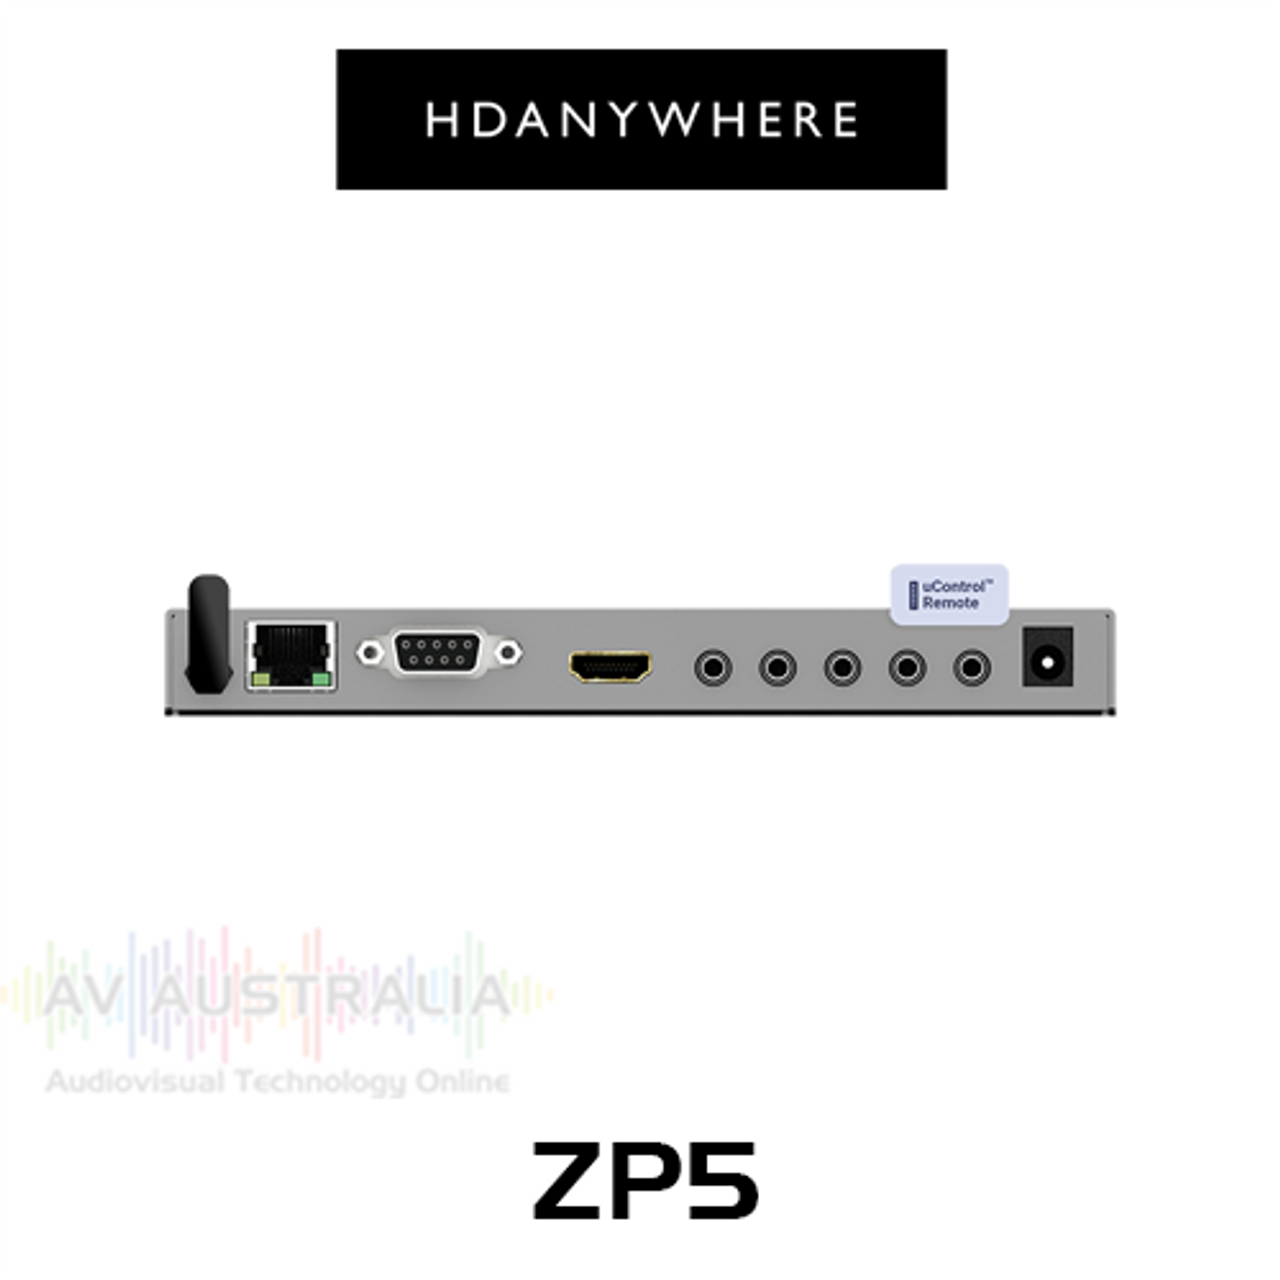 HDAnywhere ZP5 uControl Zone Processor